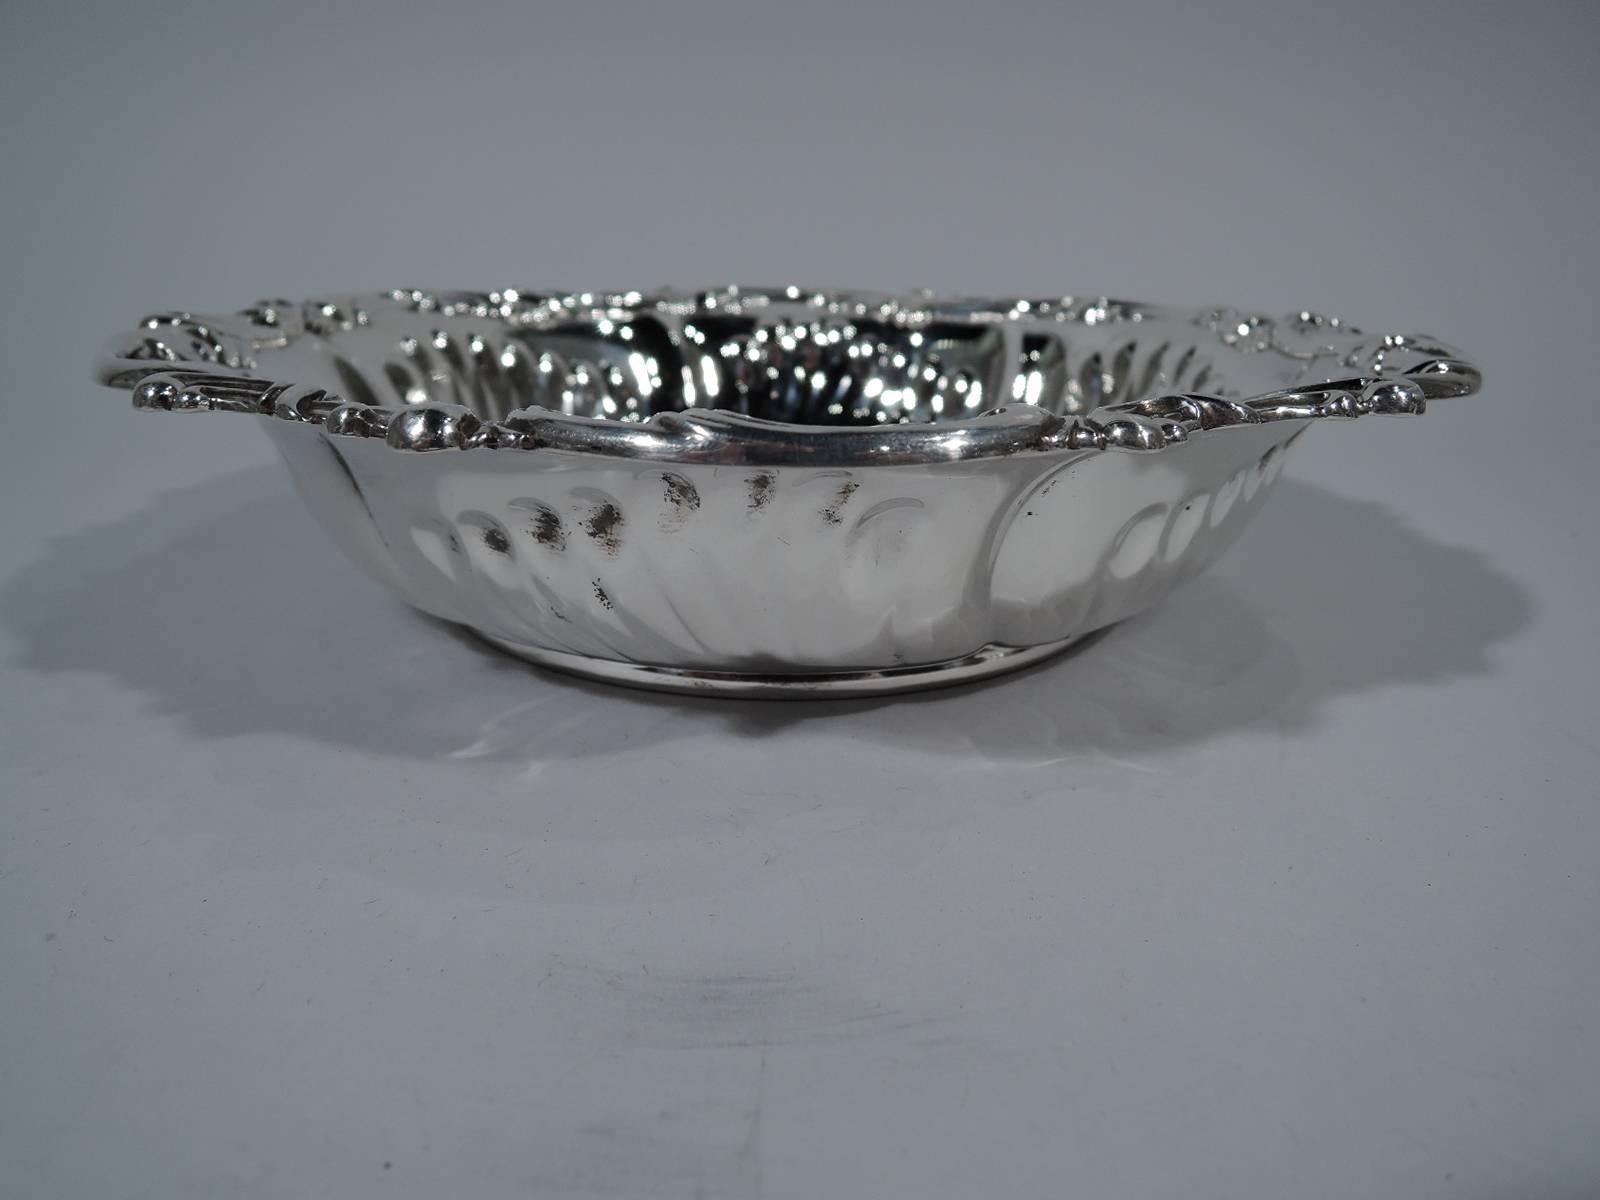 Sterling silver bowl. Made by Whiting in New York, circa 1900. Curved sides with twisted fluting and overlapping c-scrolls on rim. Foot ring. A pretty piece with nice heft. Hallmark includes no. 3999. Heavy weight: 15 troy ounces.